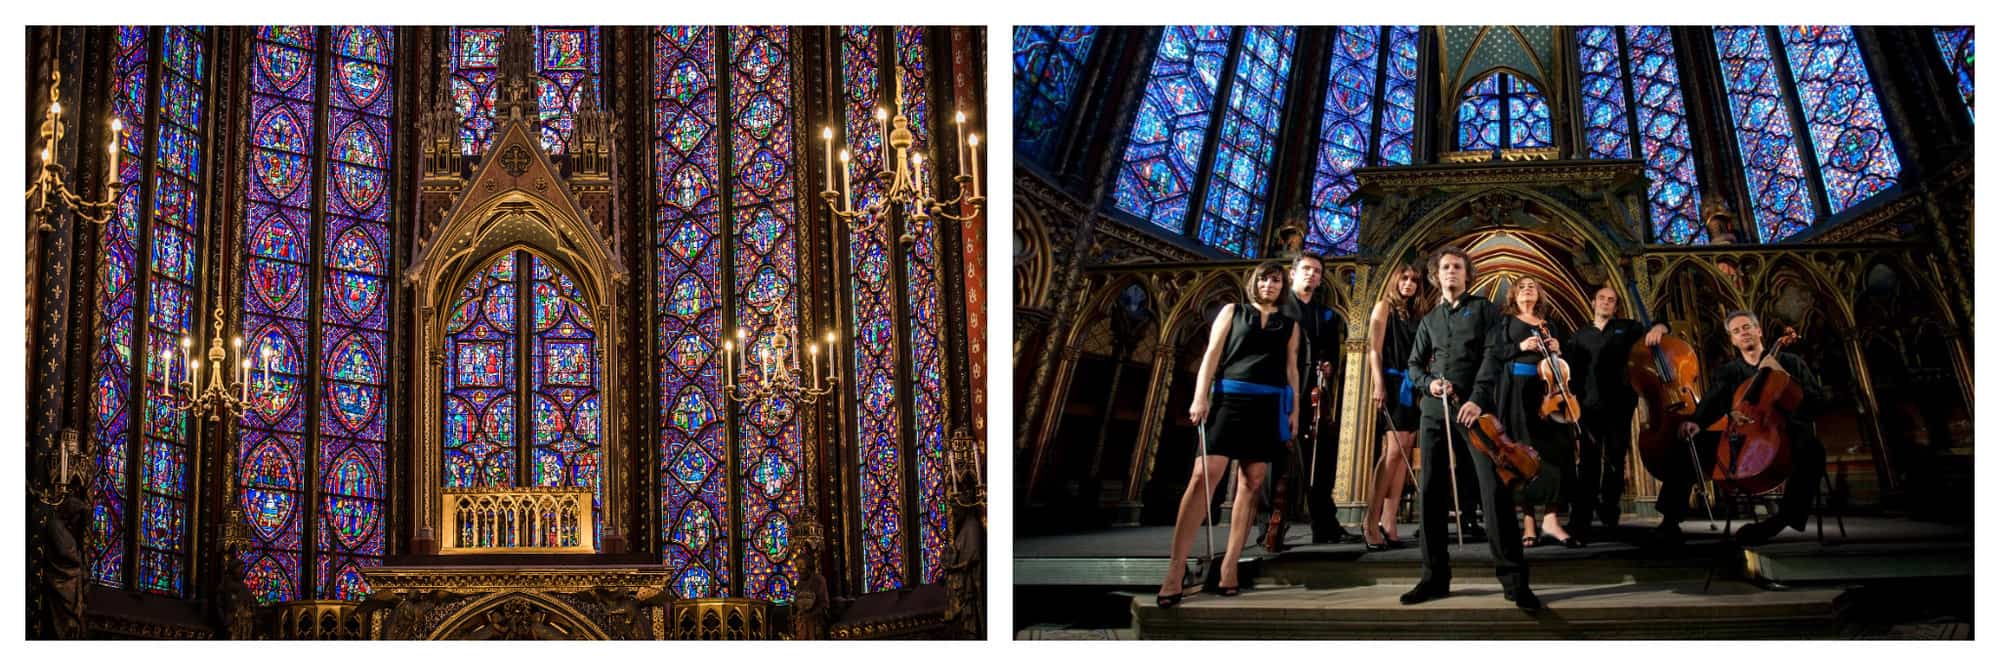 Left: The Sainte Chapelle church in Paris with its beautiful 13th century stained glass altar. Right: The classical music group "Les Solistes Français" at the Sainte Chapelle, posed with their musical instruments.